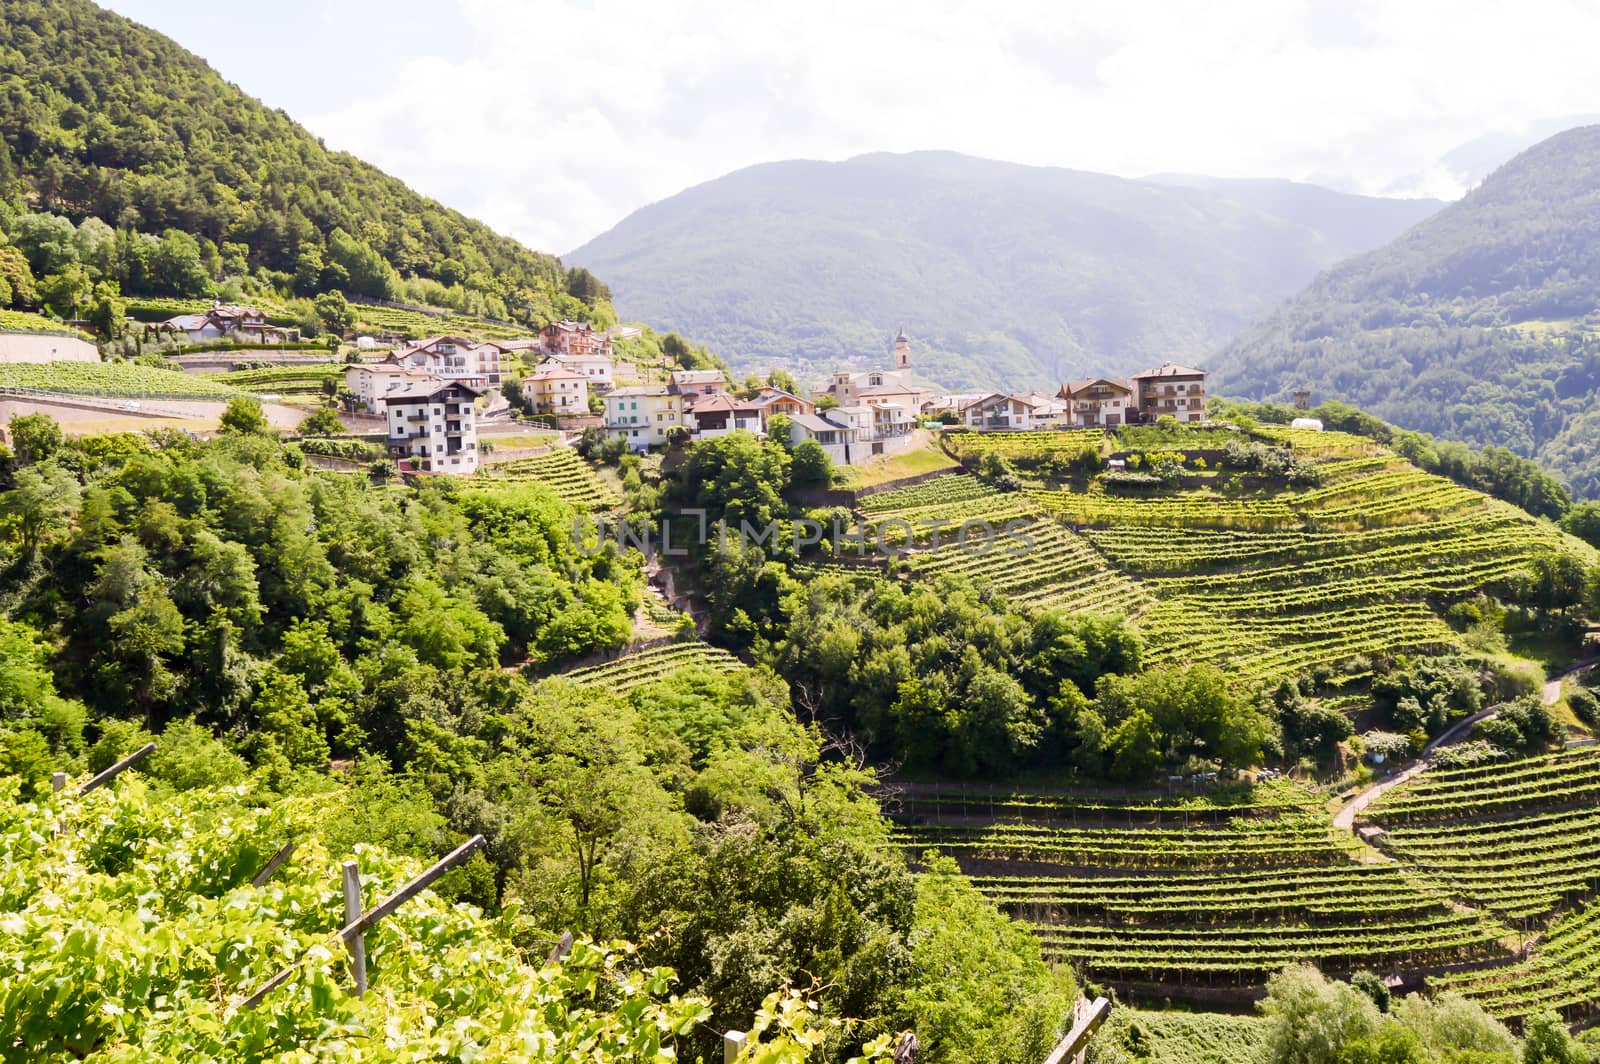 View of a village and vineyards in South Tyrol on South Tyrol in Italy